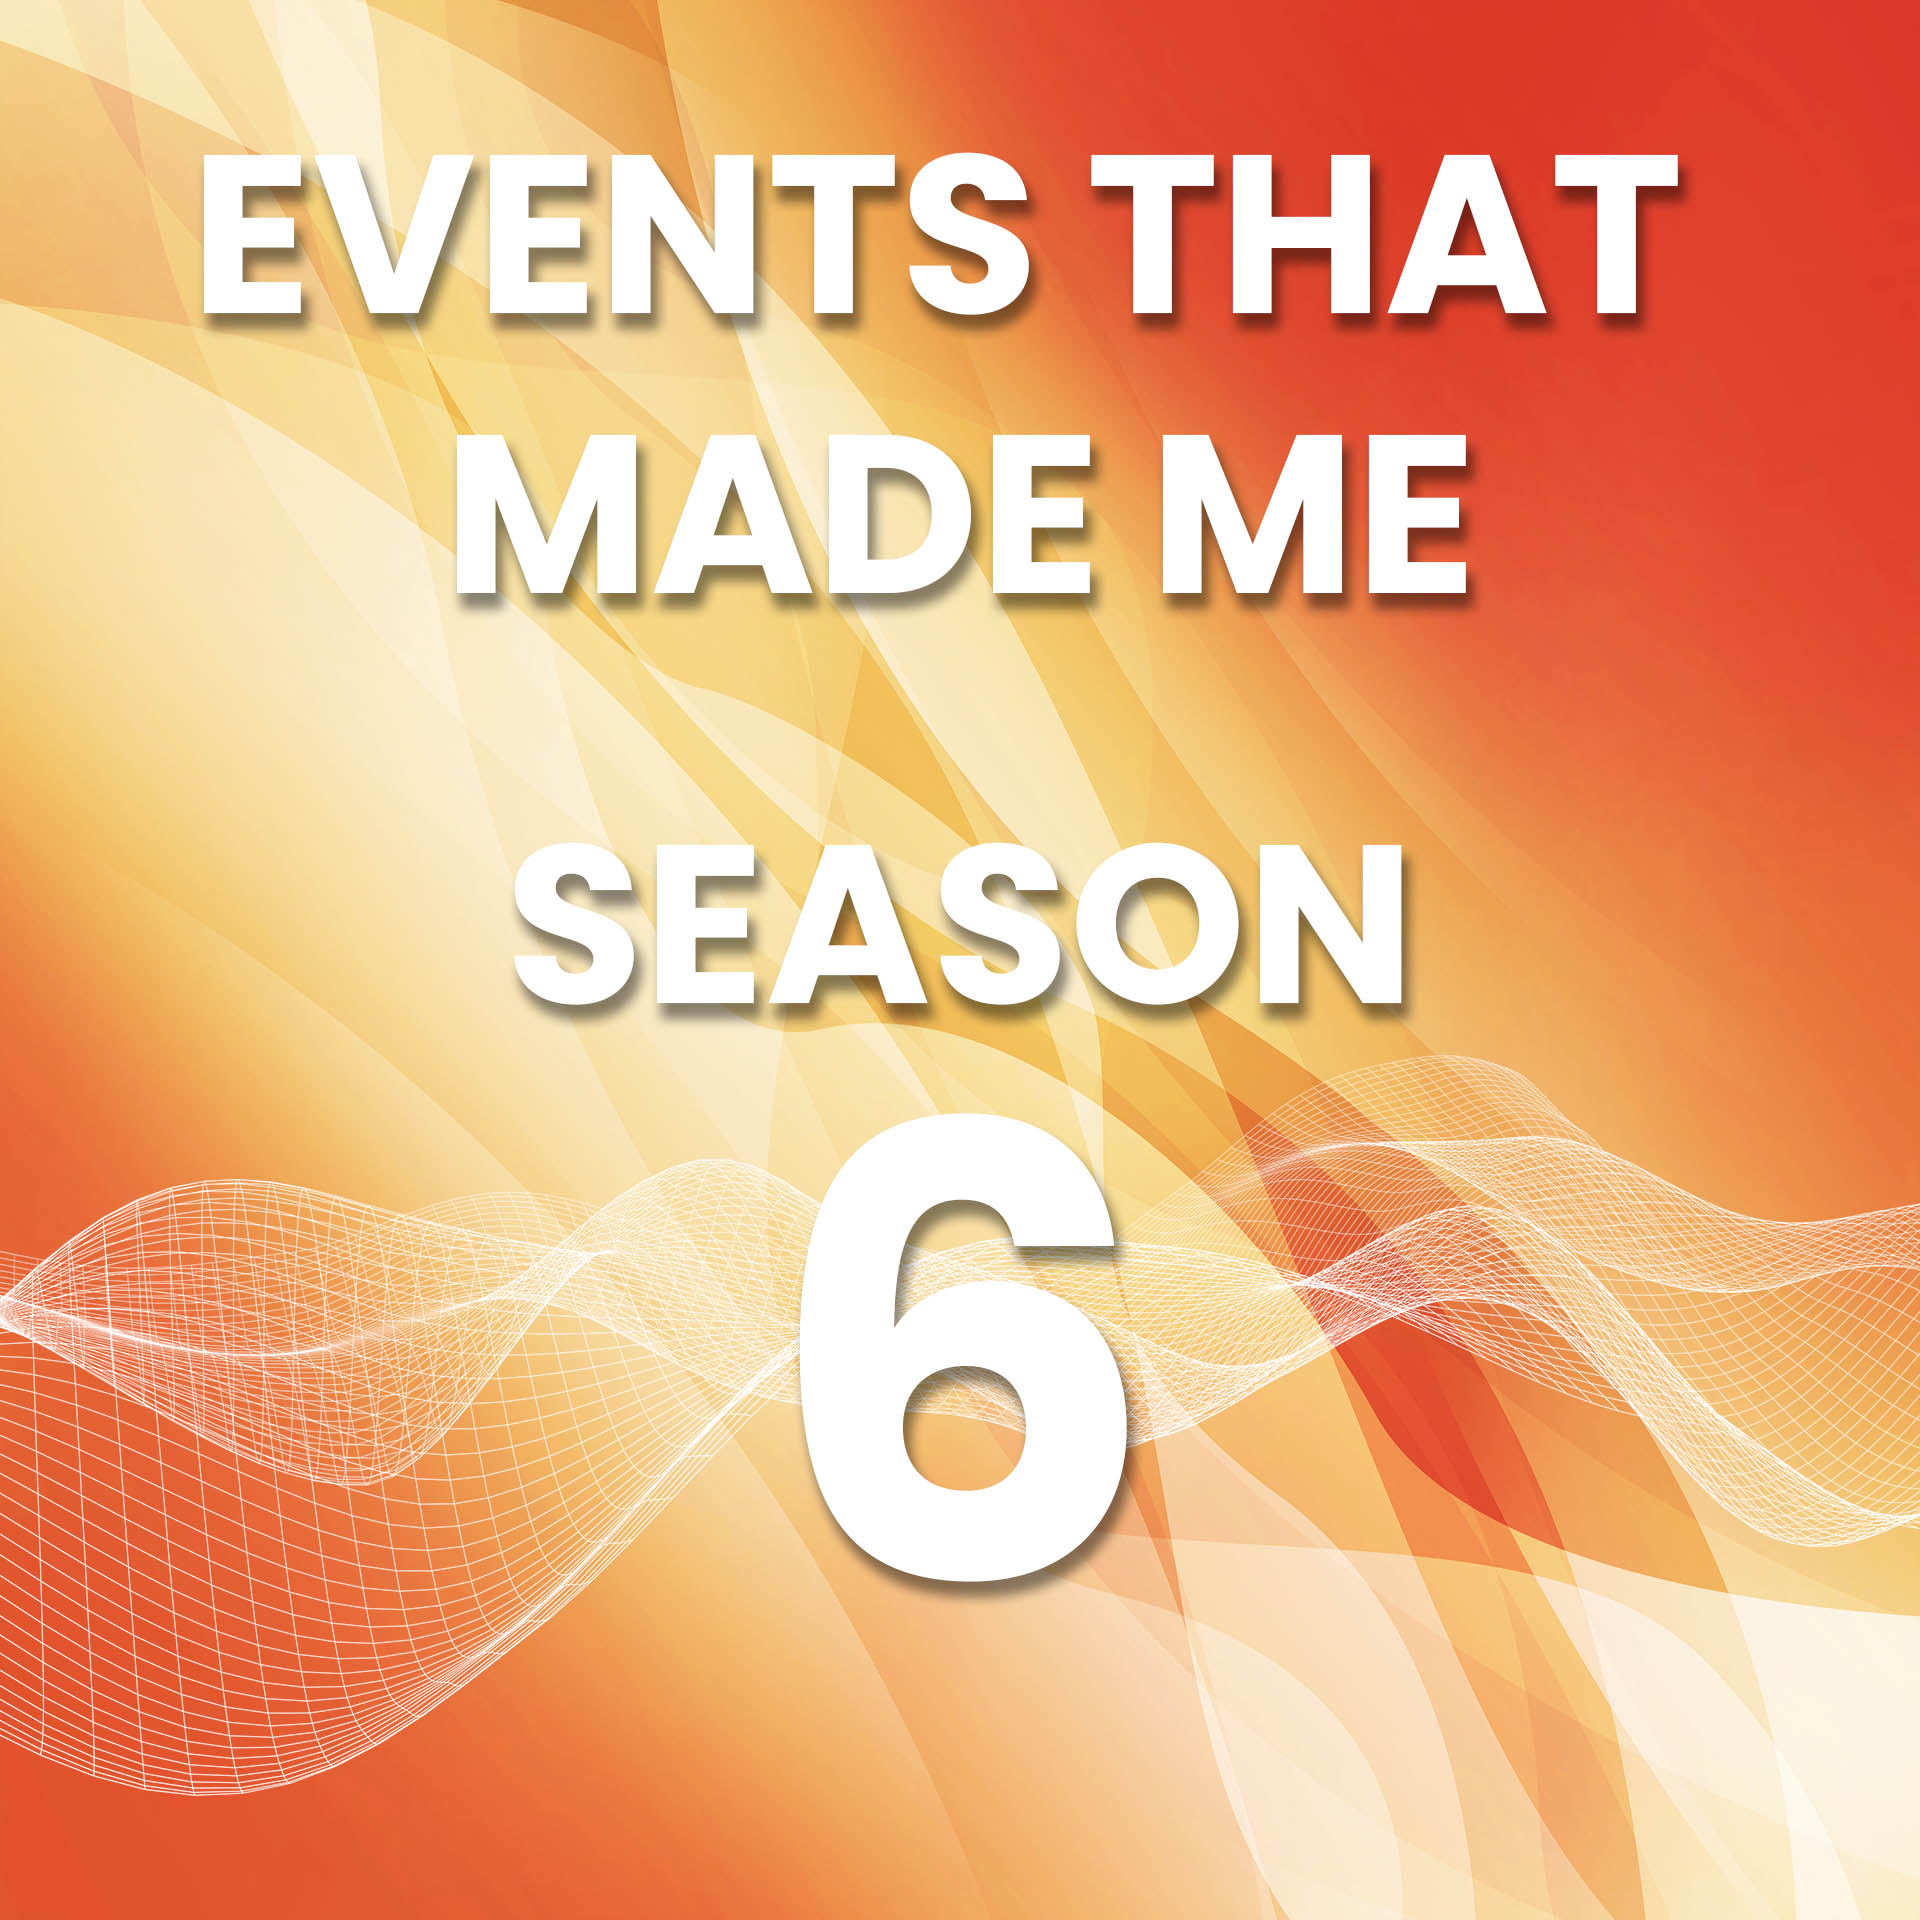 Events that Made Me Season 6